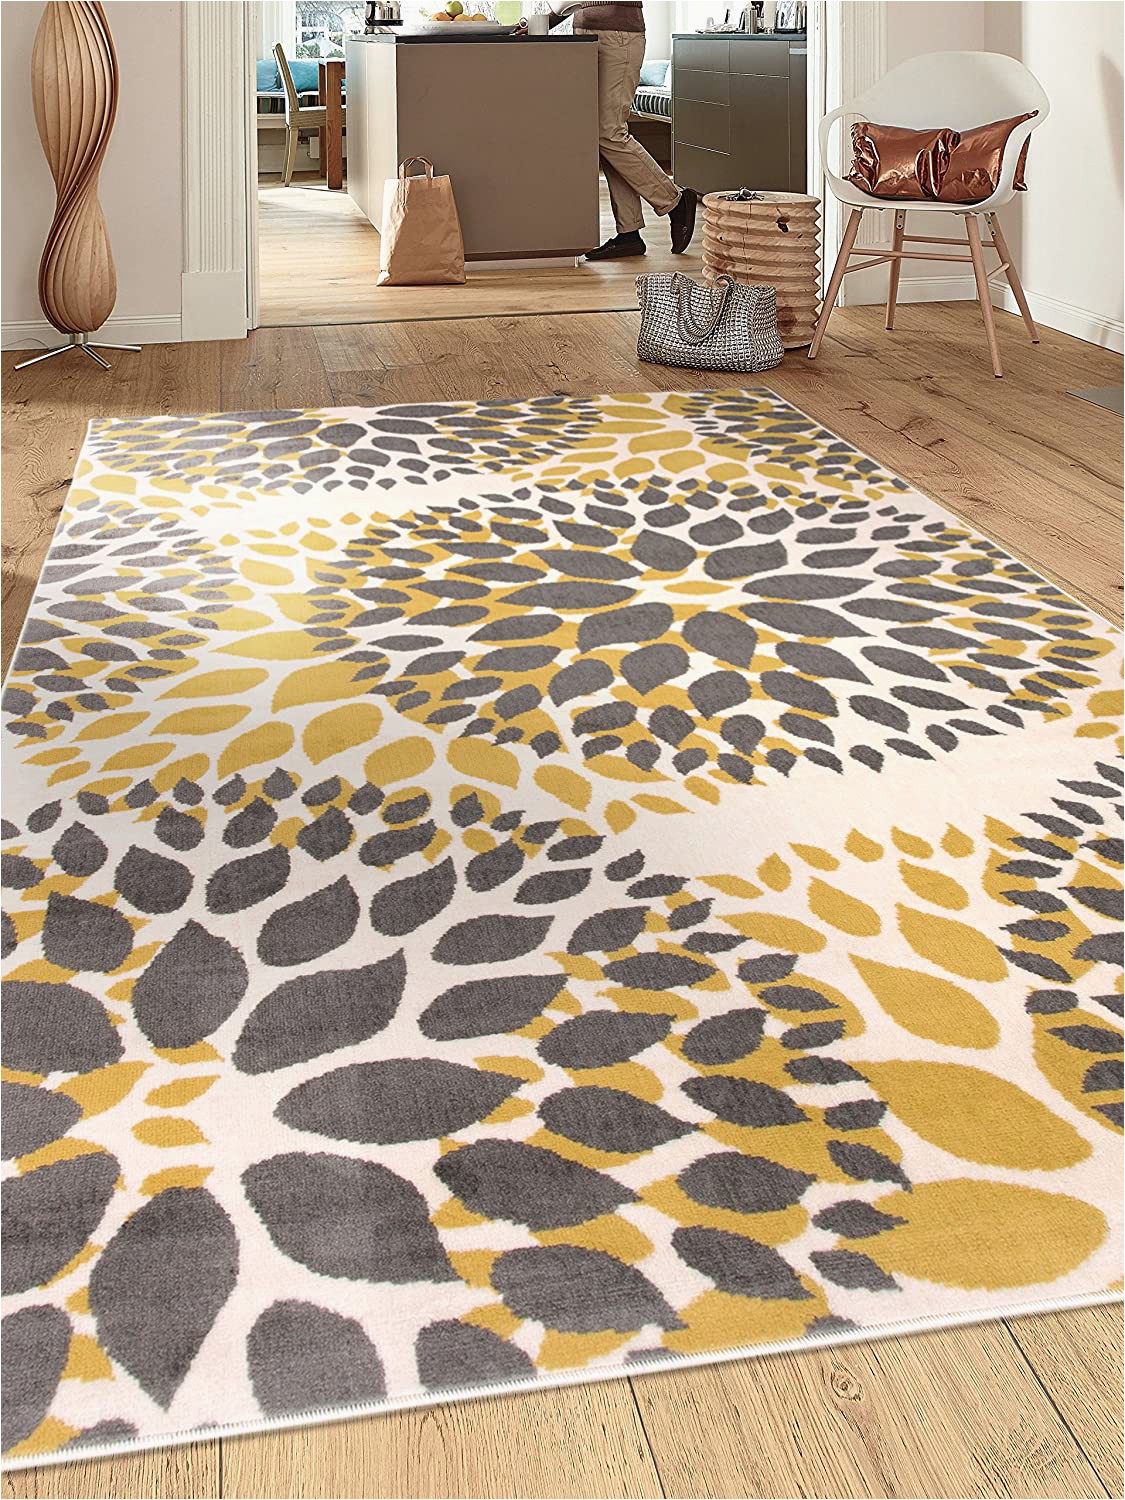 5×7 area Rugs at Lowes Modern Floral Circles Design area Rugs 7 6" X 9 5" Yellow